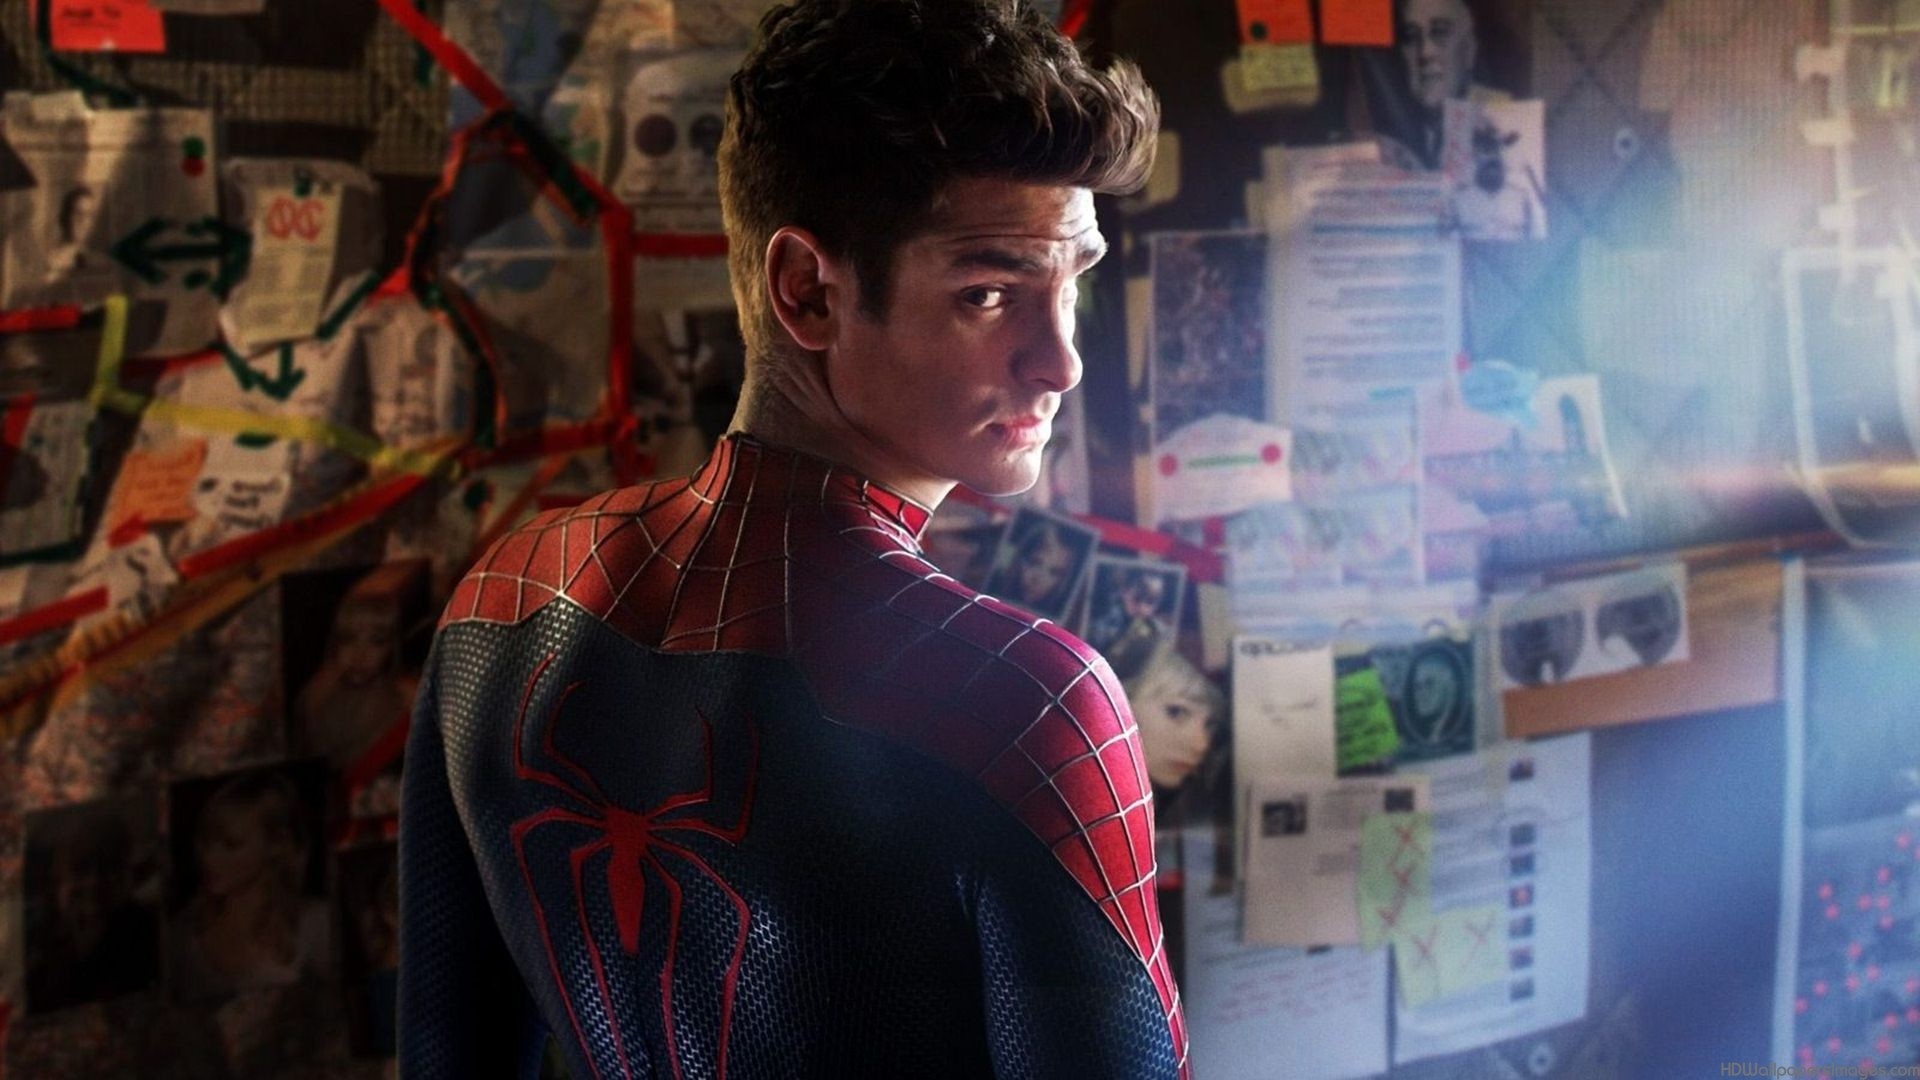 1920x1080 Andrew Garfield as Peter Parker/Spiderman. Sony Pictures